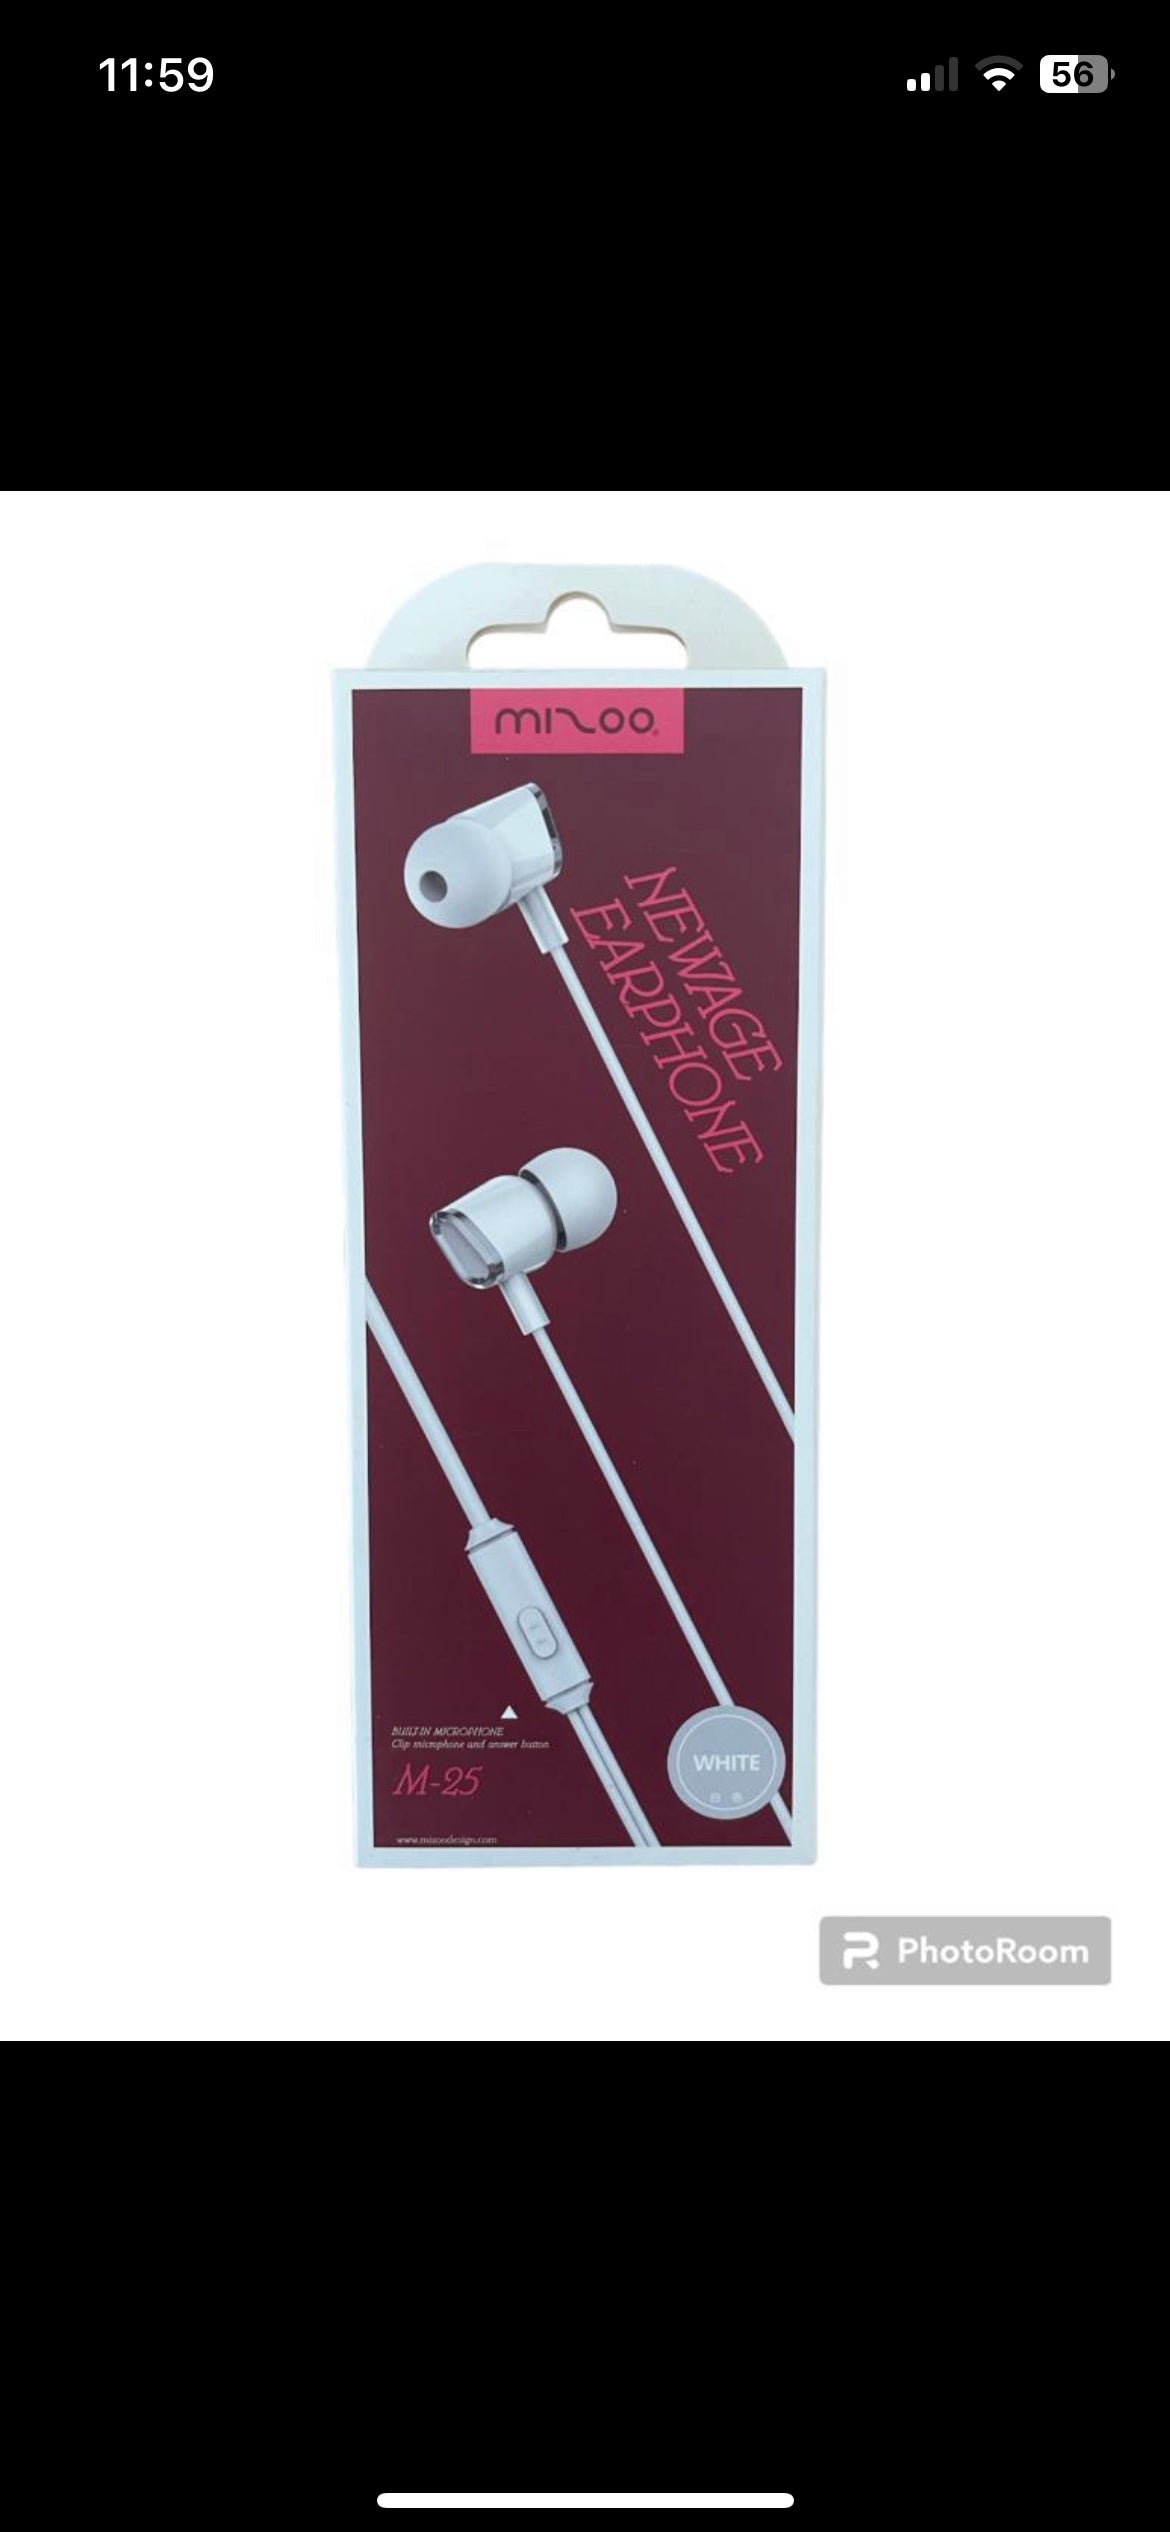 Mizoo new age earphones with clip microphone and answer button